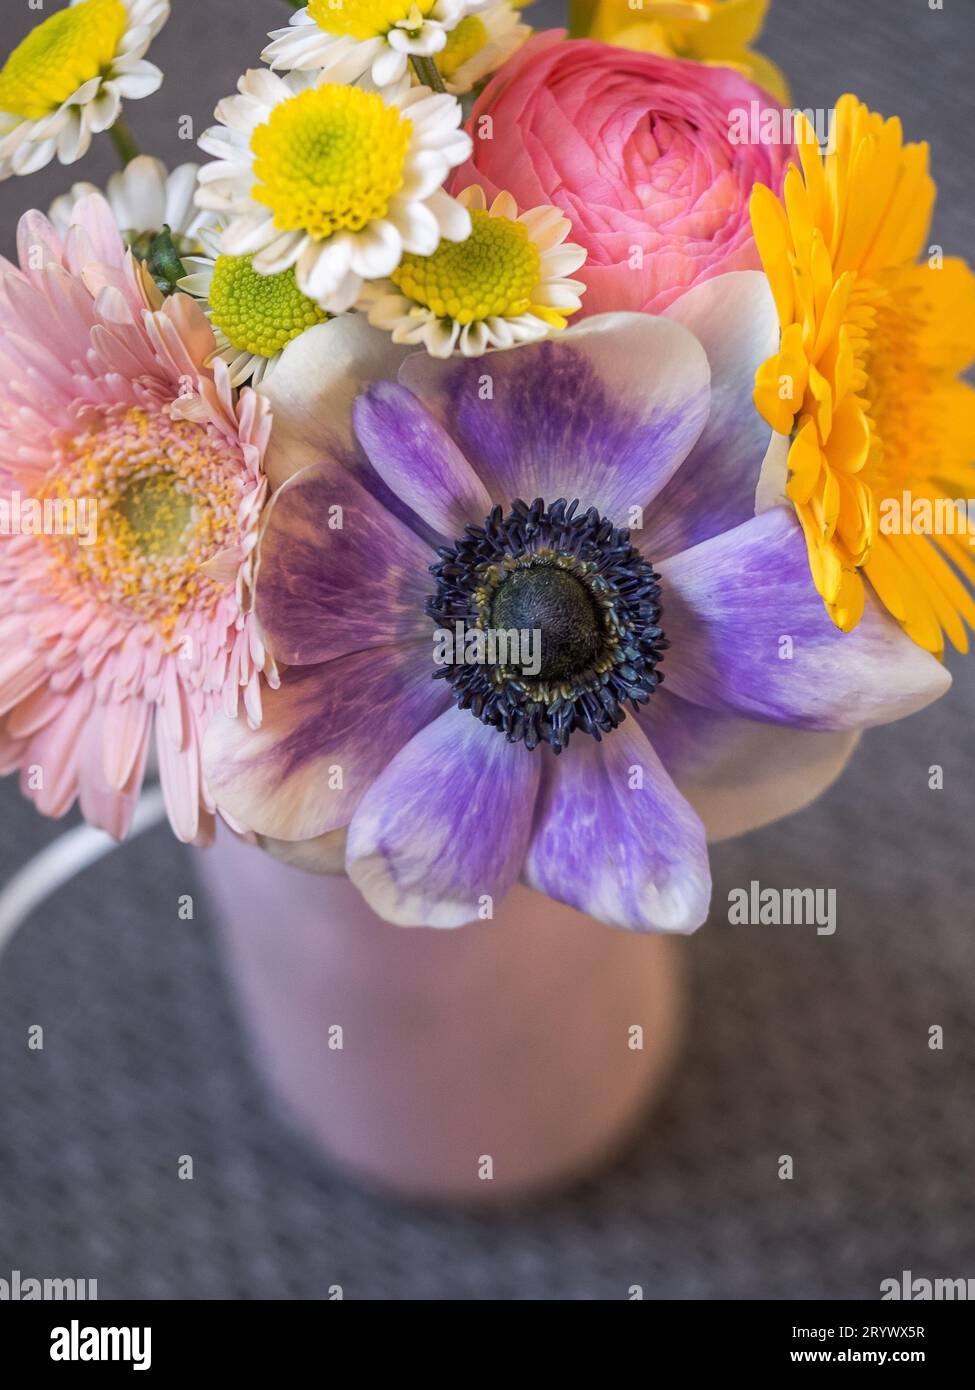 A top view of a bouquet of colorful spring flowers Stock Photo